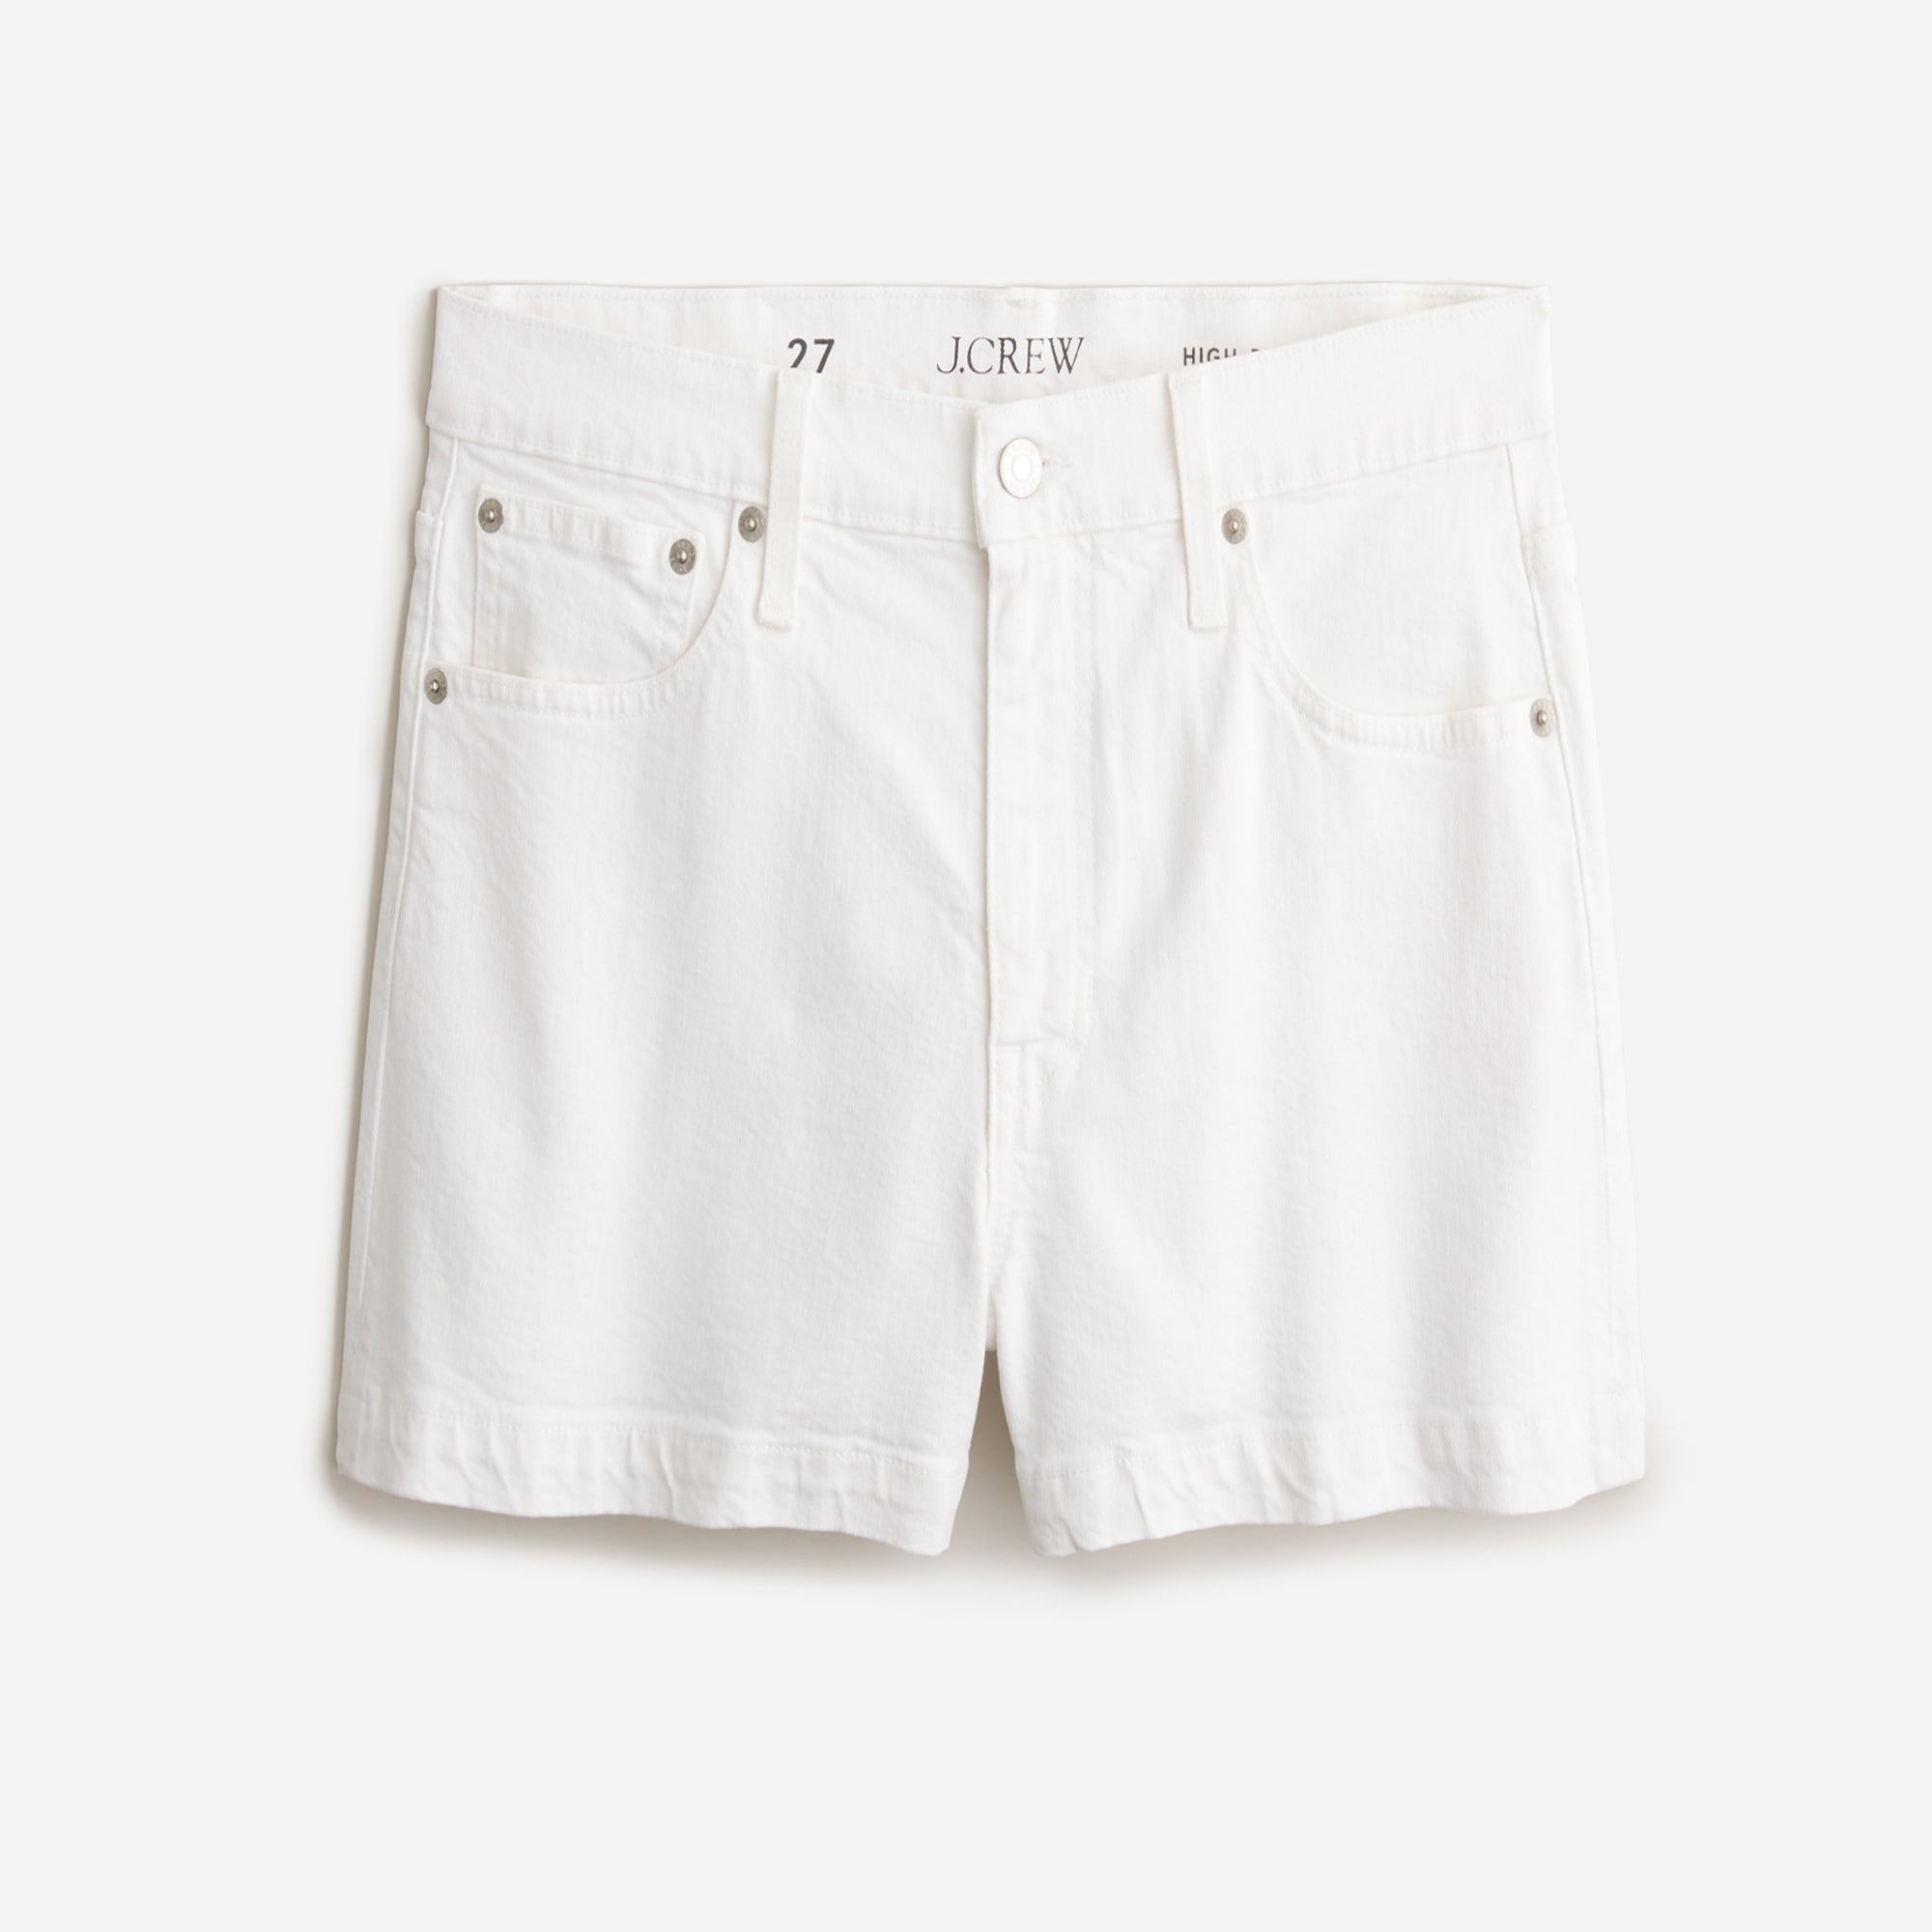 Bailey Ray and Co - White High Waisted Denim Shorts - The Whitney